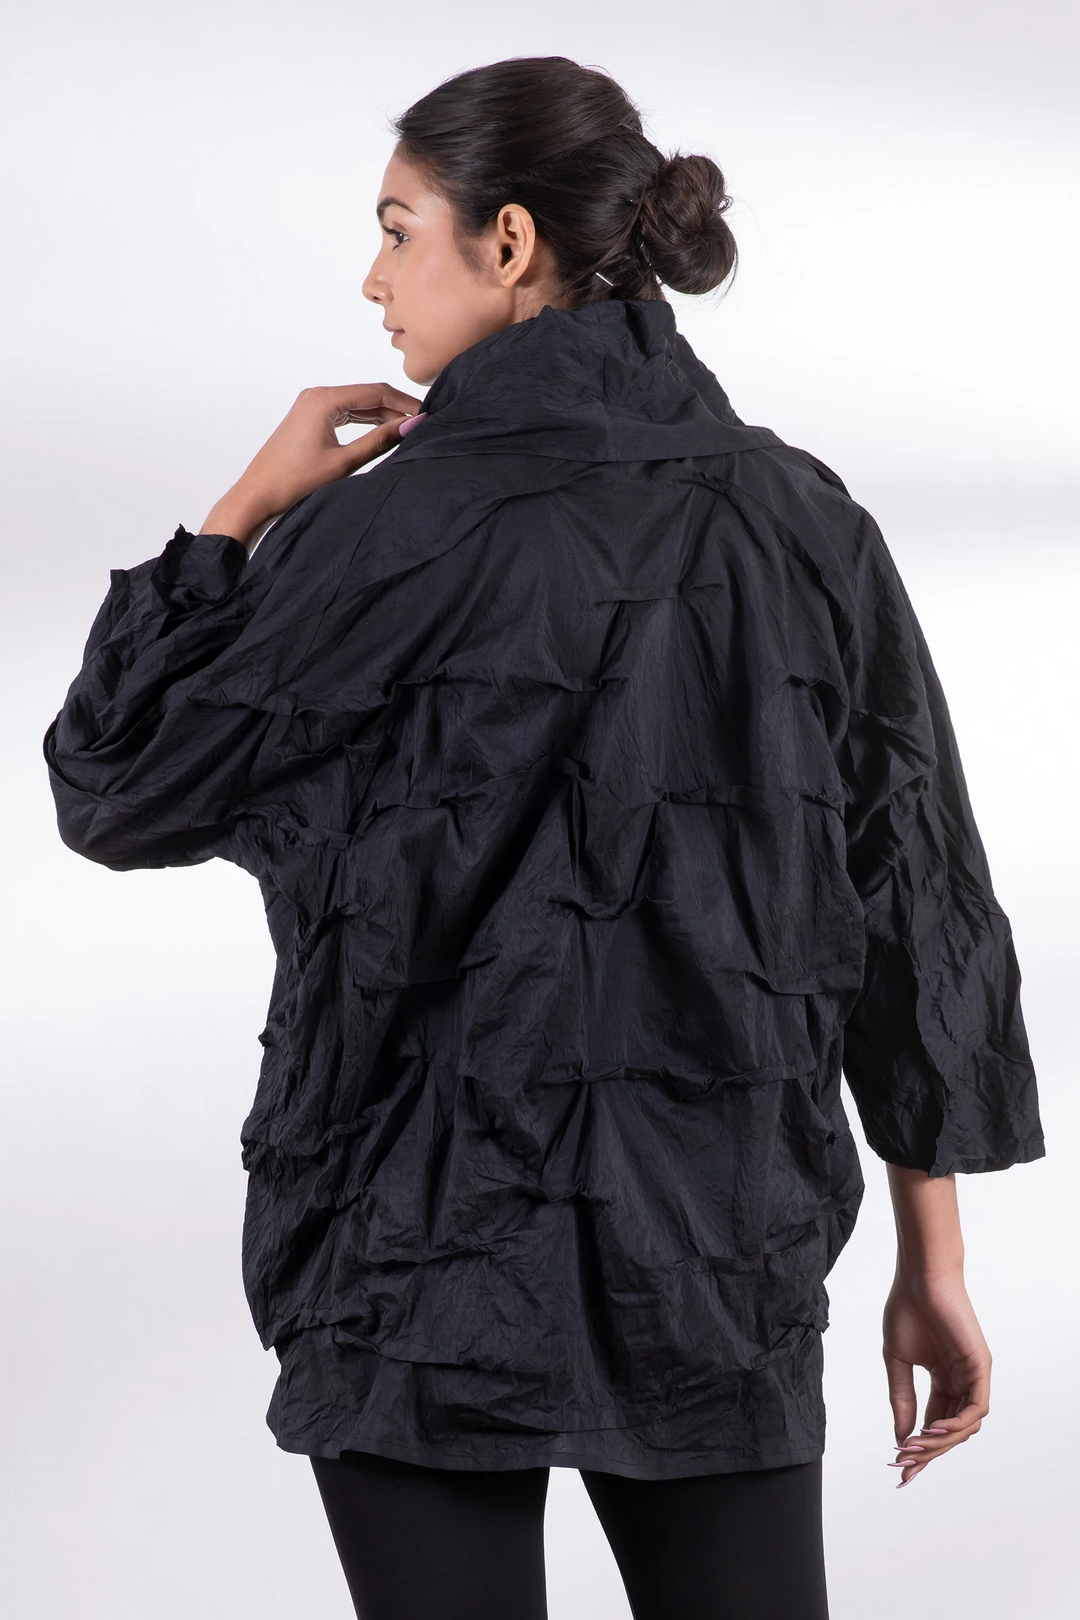 DYED COTTON SILK HEAVY VOILE WAVY TUCK COCOON JACKET - dh1063-blk -